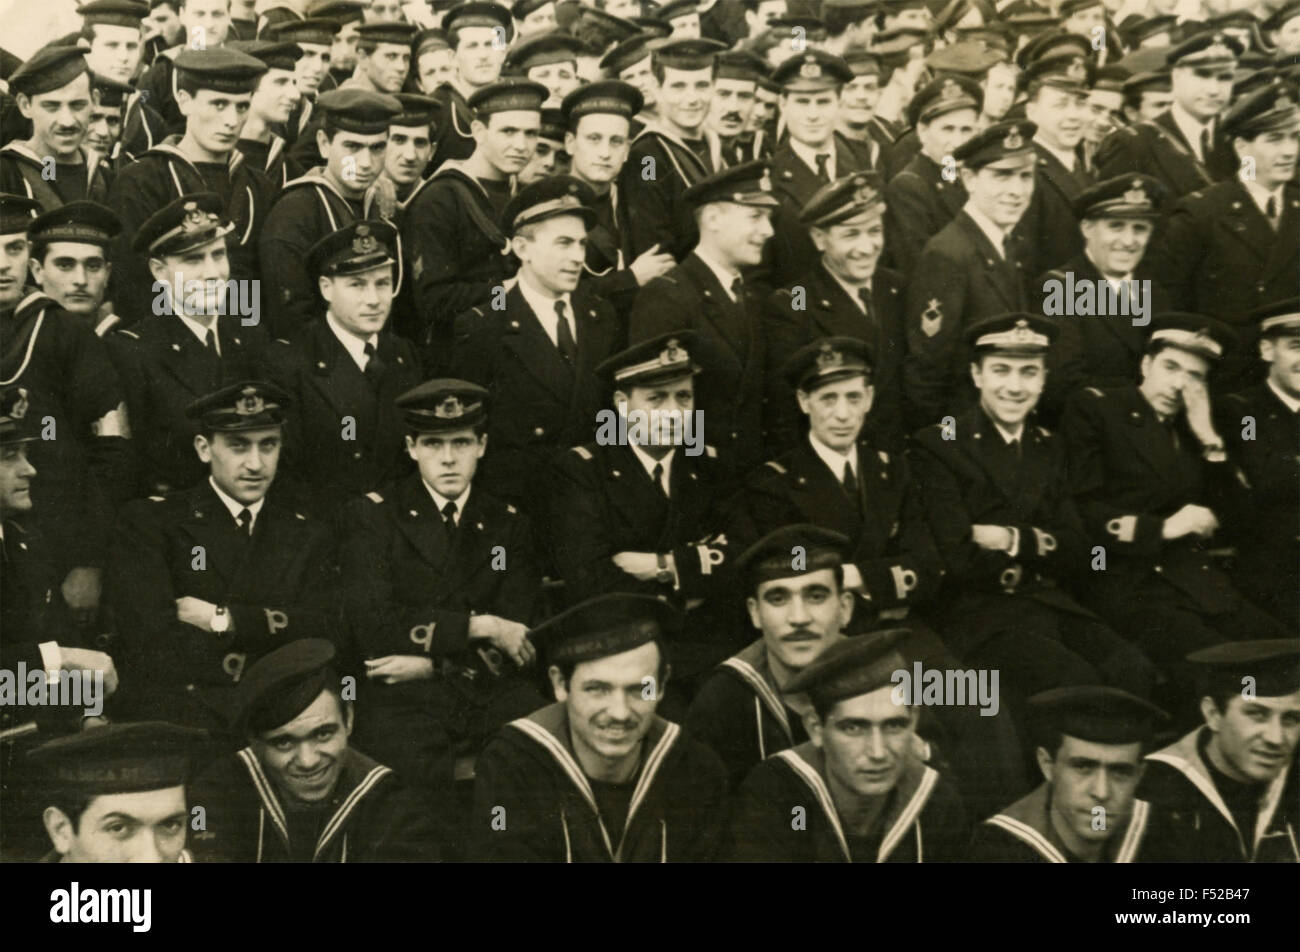 Officers and sailors of the Italian Navy after World War II, Italy Stock Photo